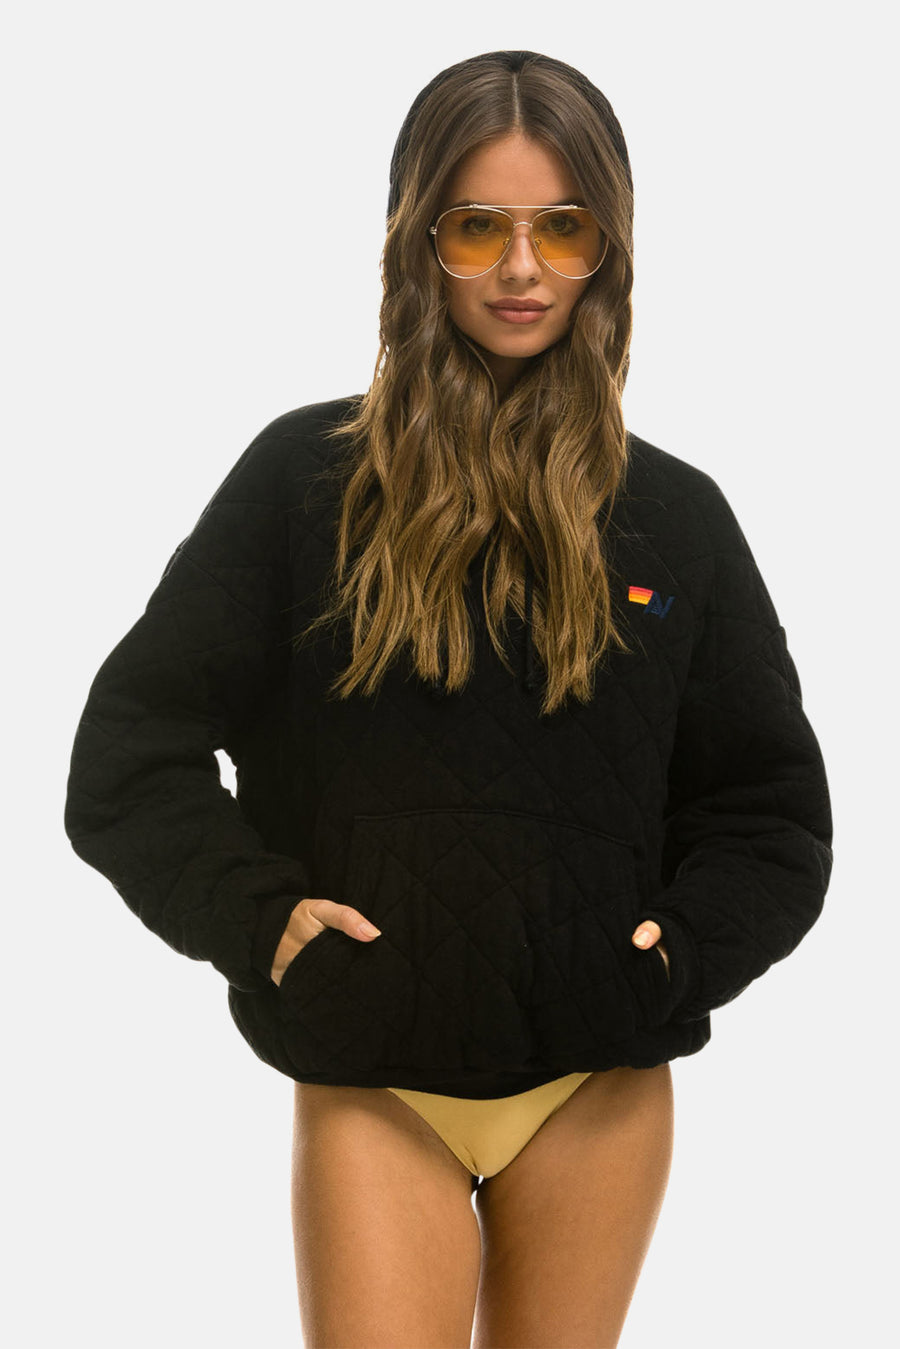 Women's Quilted Relaxed Hoodie Black